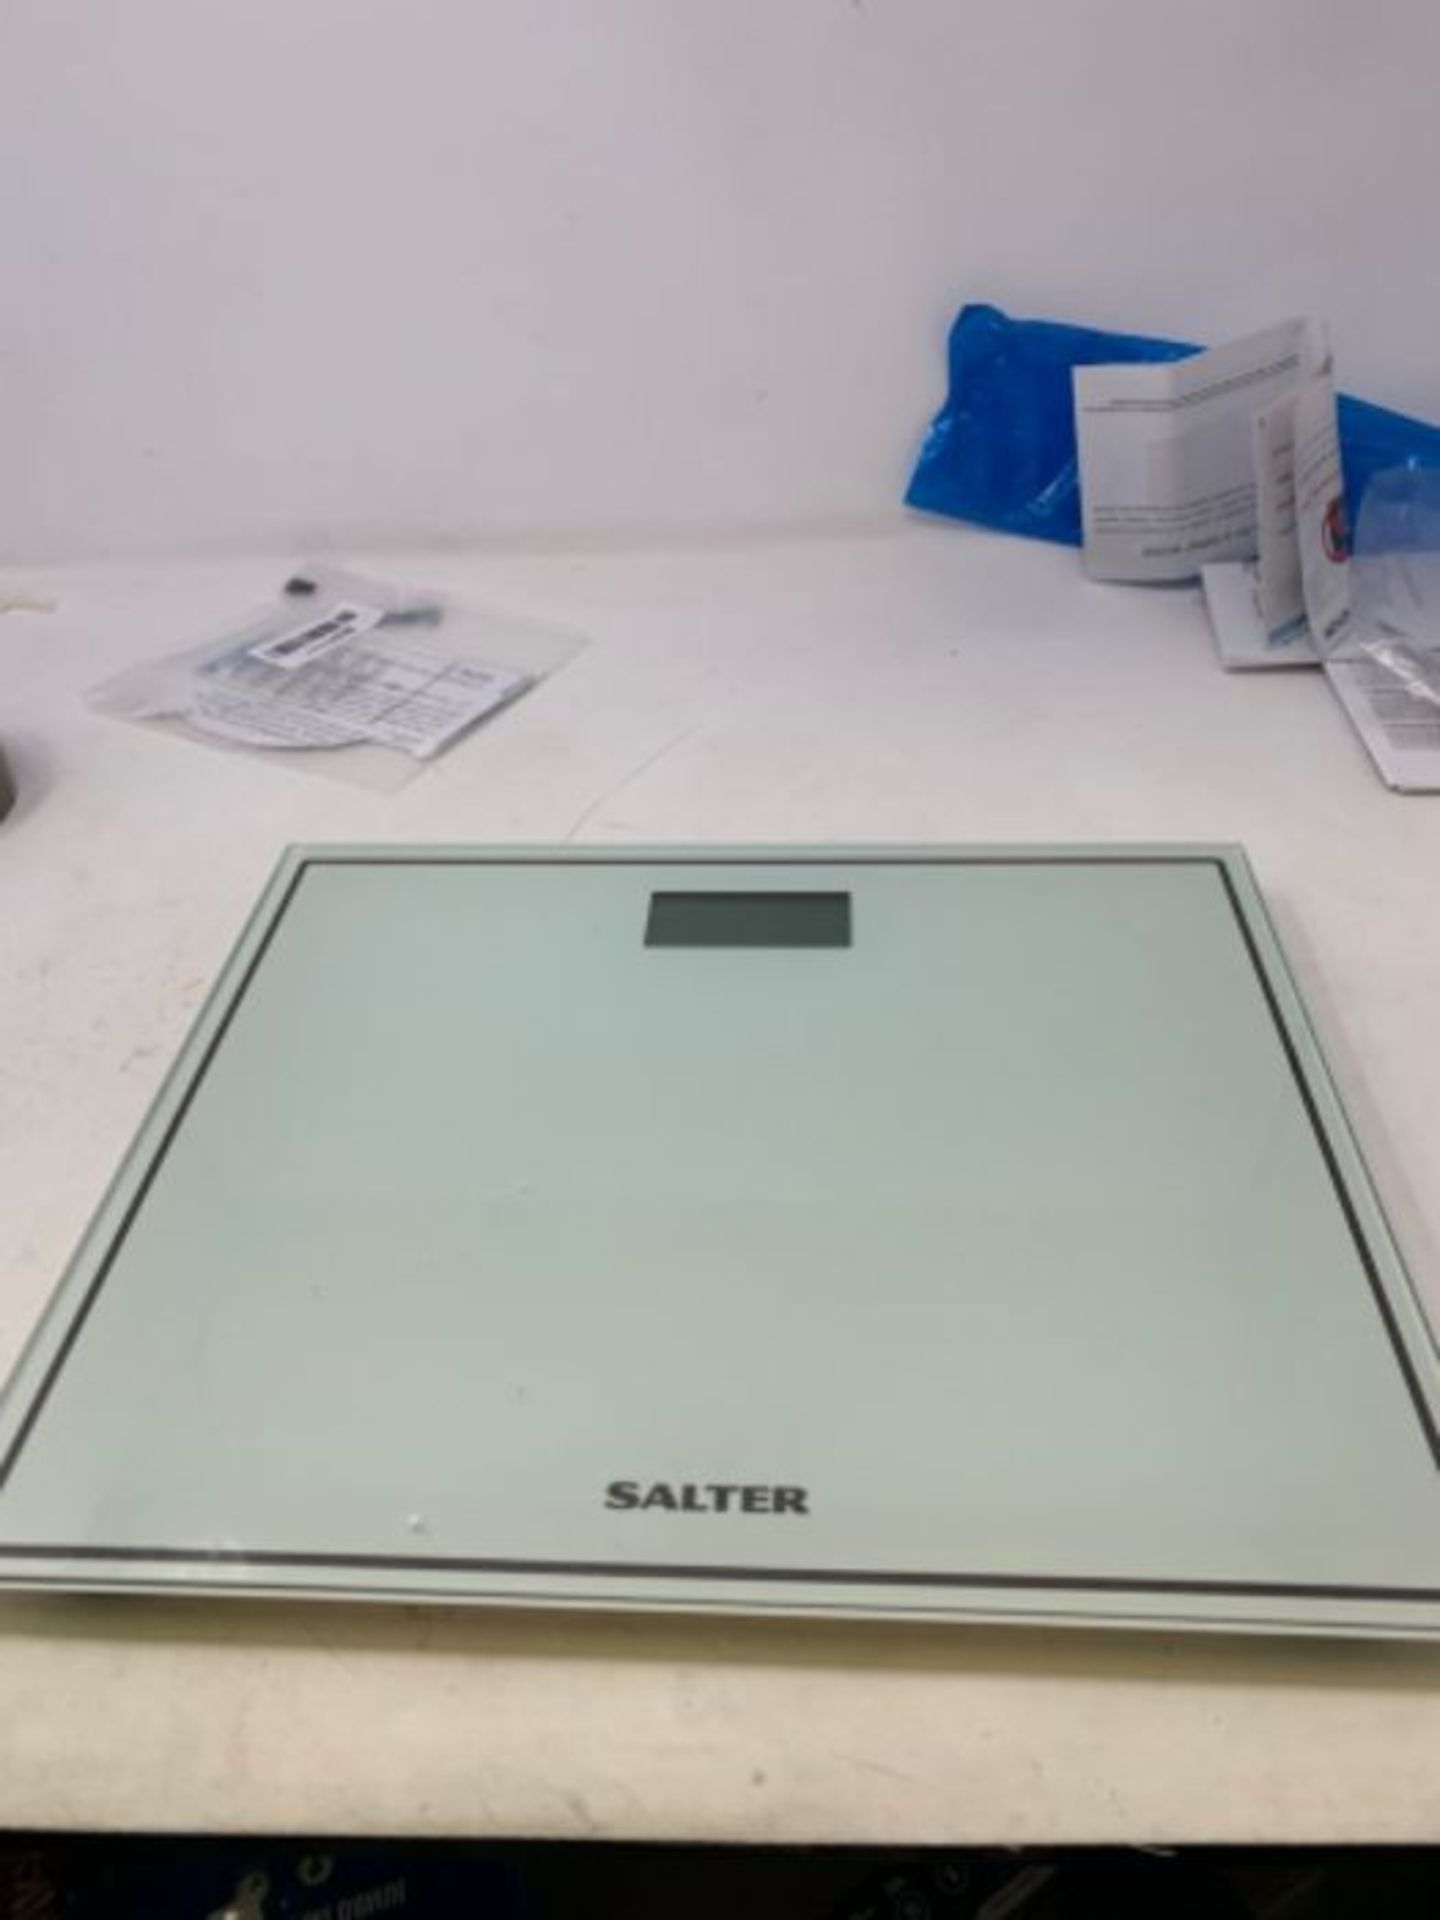 Salter Compact Digital Bathroom Scales - Toughened Glass, Measure Body Weight Metric / - Image 2 of 2